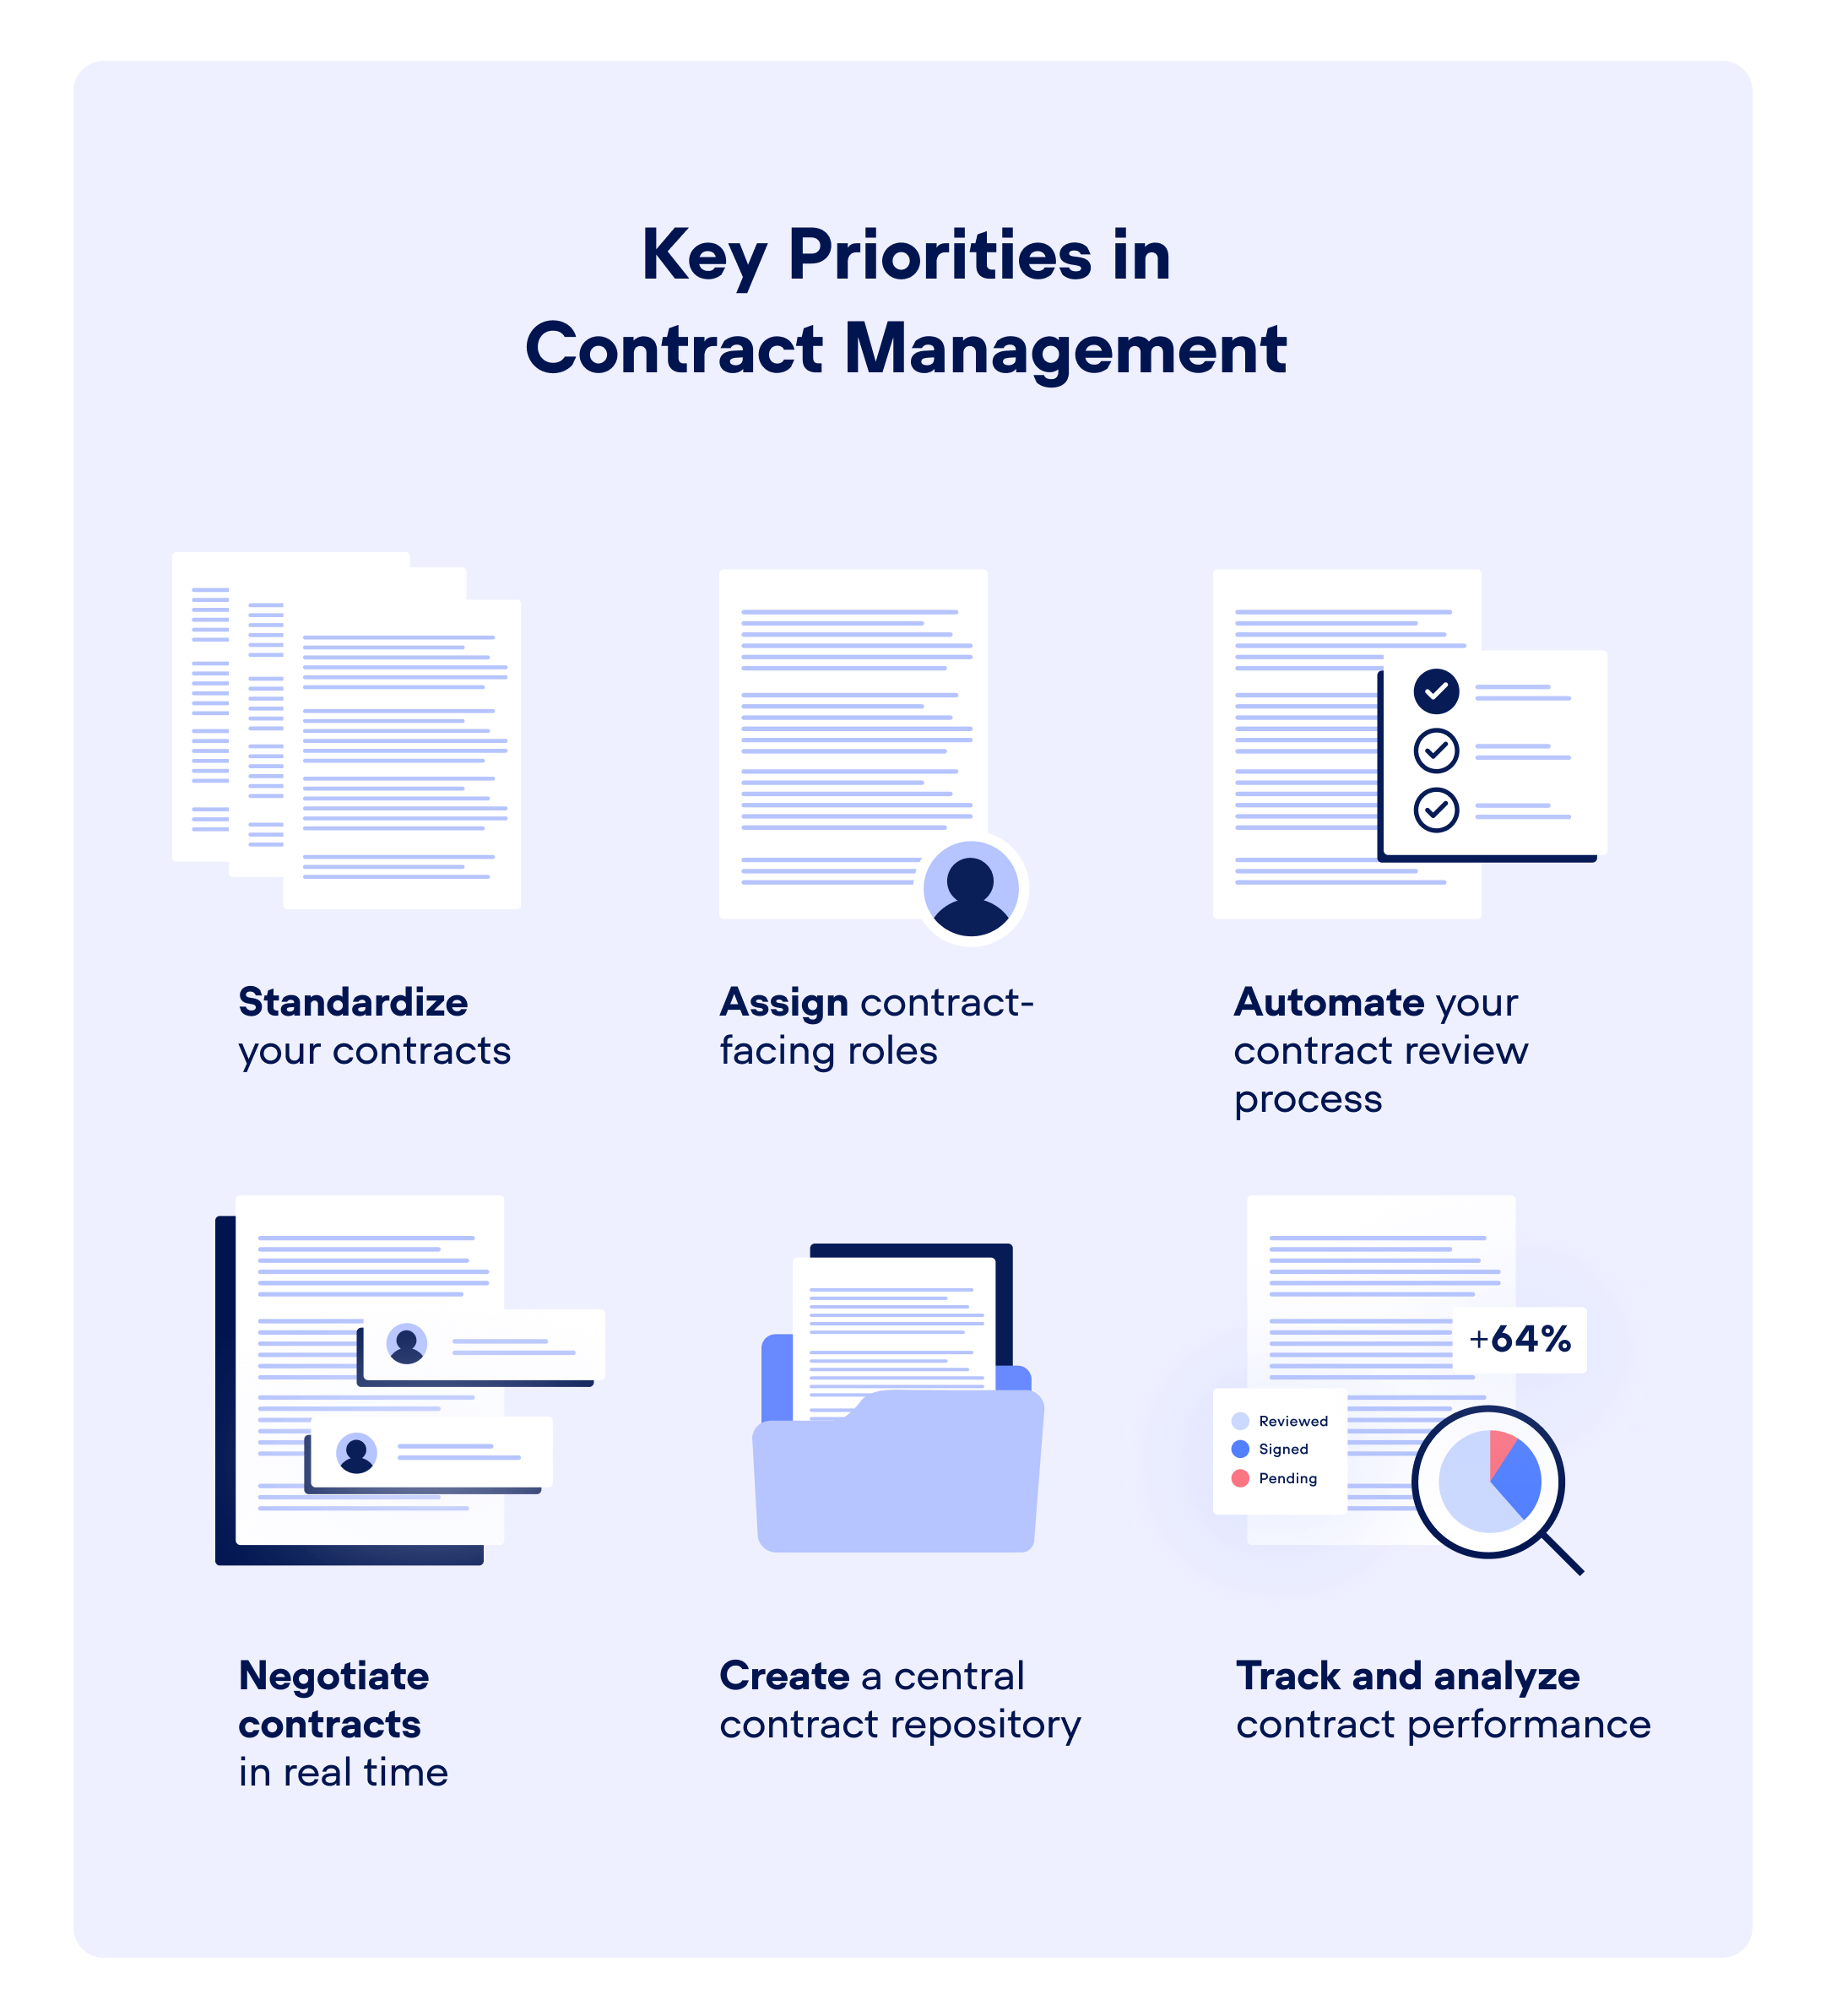 Infographic on the "Key priorities in contract management". It shows the key priorities of CLM, including: standardizing contracts, assigning contract-facing roles, automating the contract review process, negotiating contracts in real time, creating a central contract repository, tracking and analyzing contract performance.